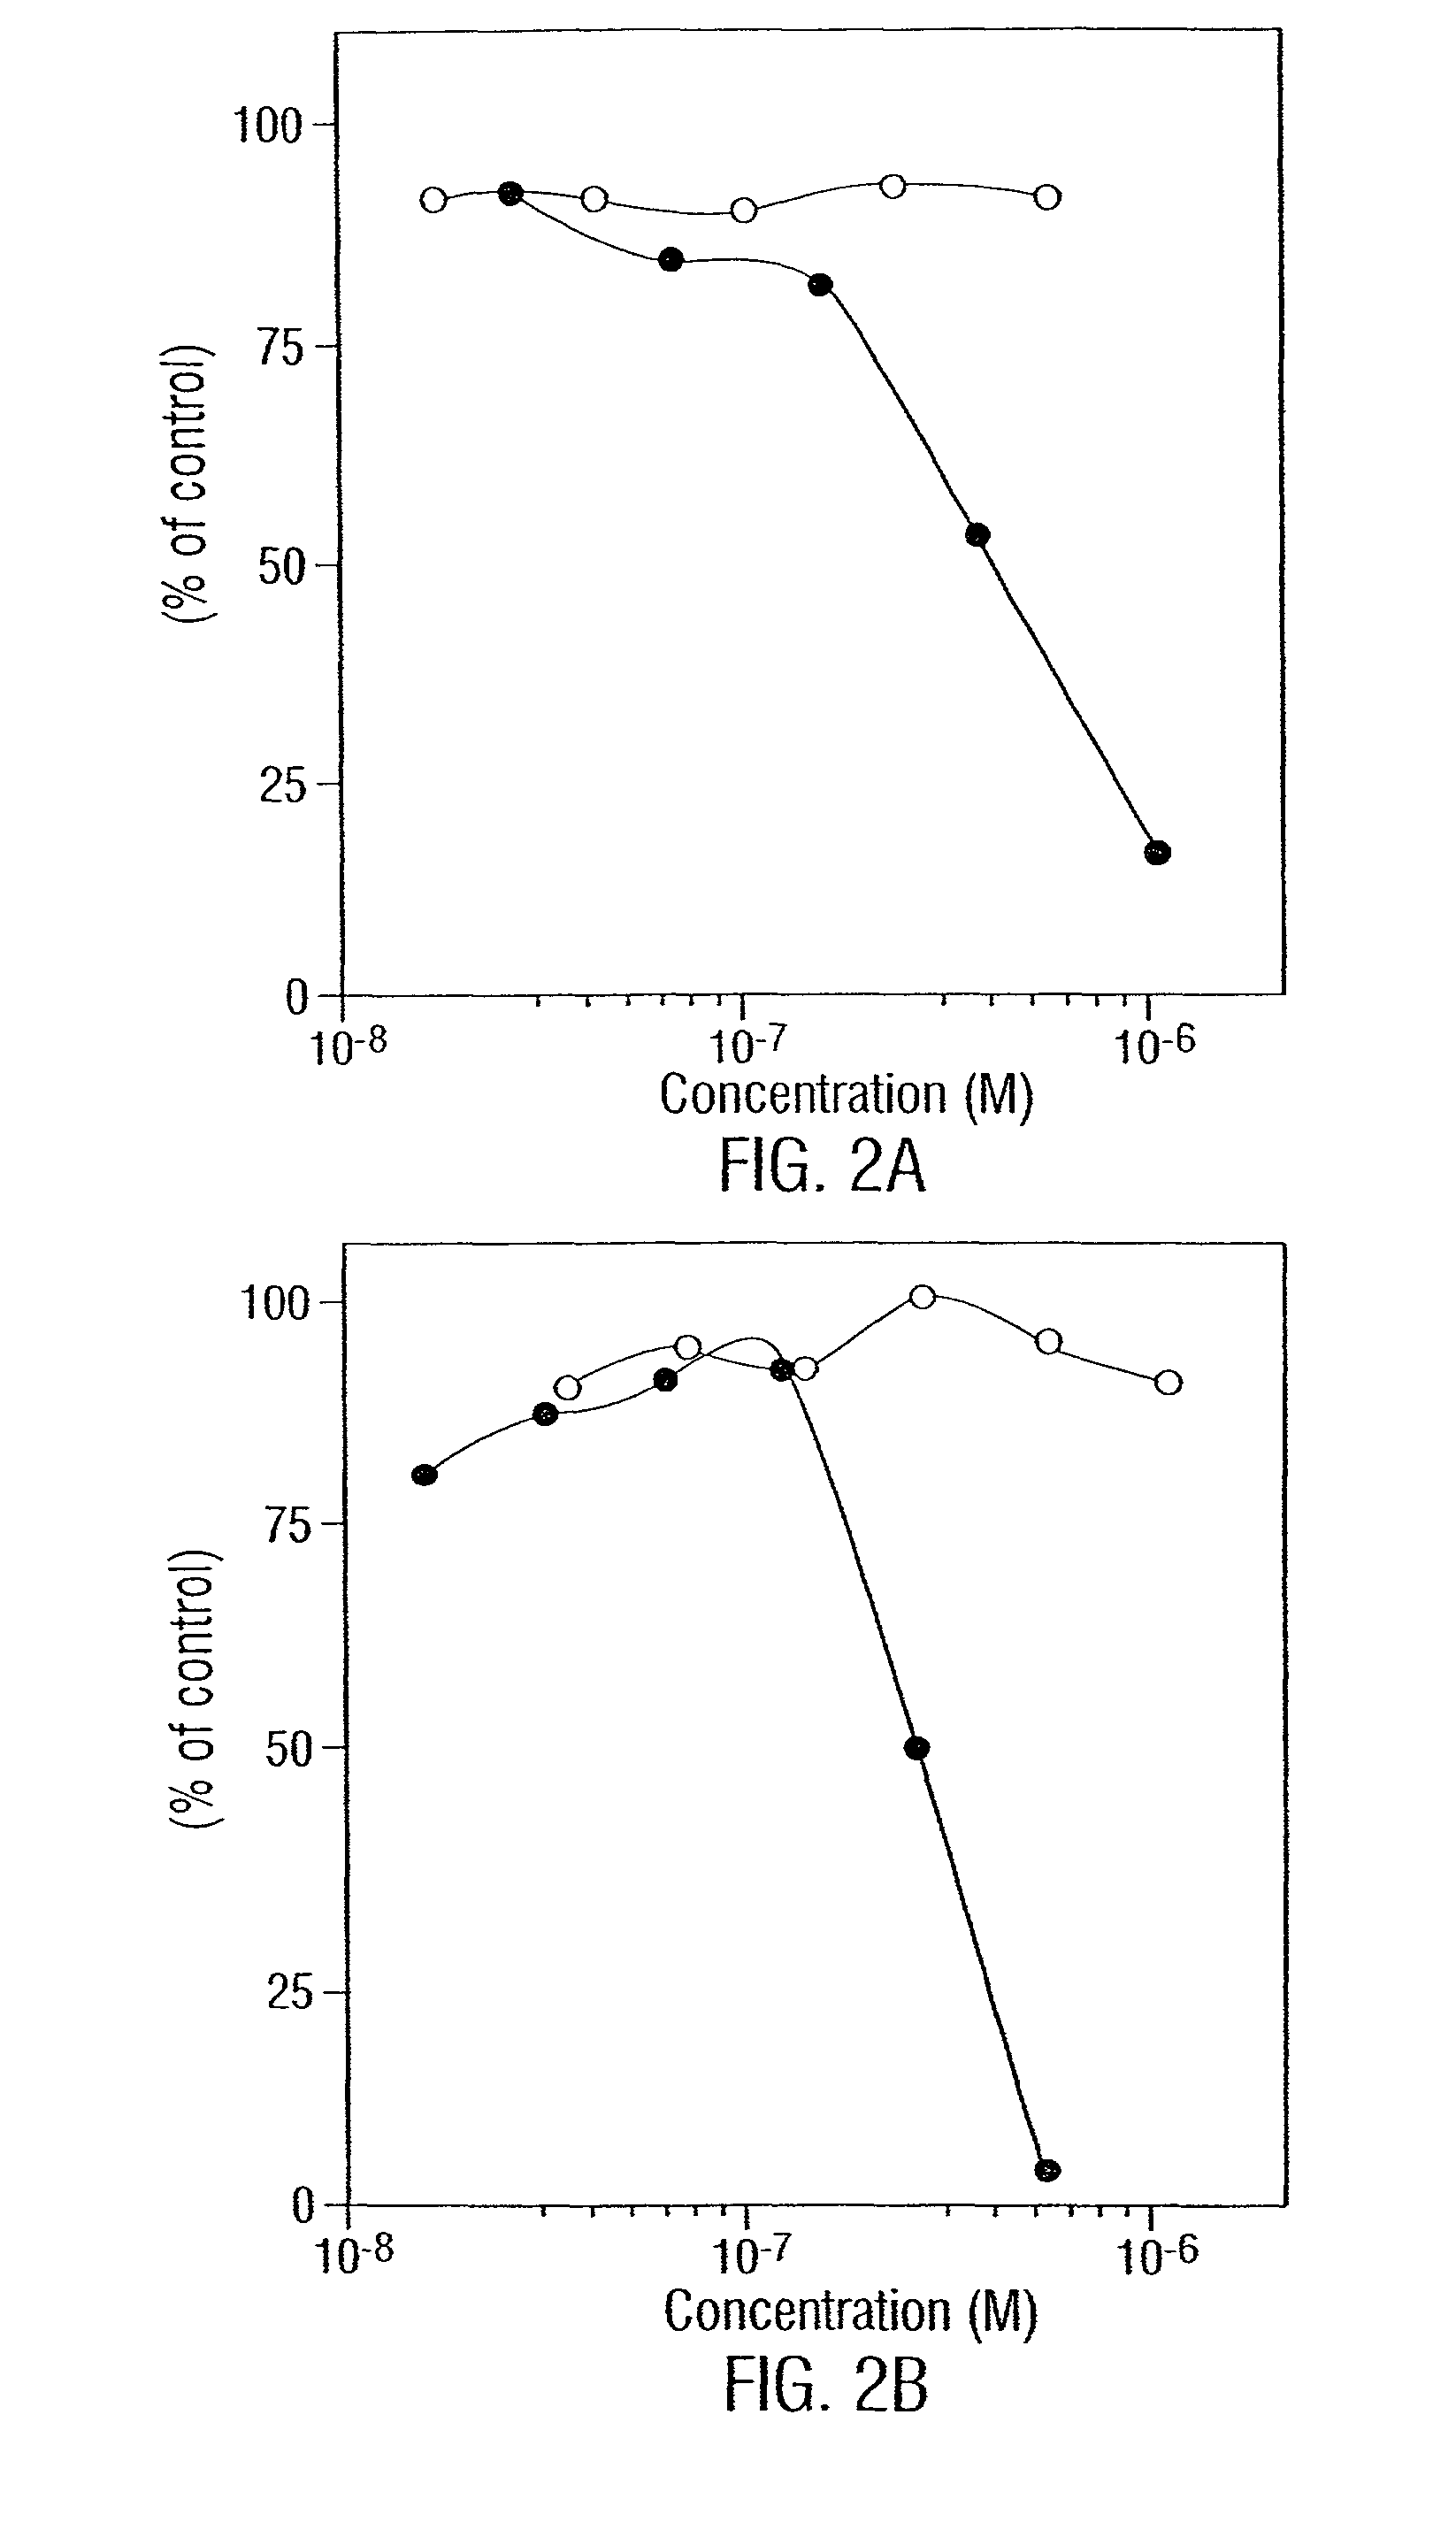 Compositions and methods for homoconjugates of antibodies which induce growth arrest of apoptosis of tumor cells